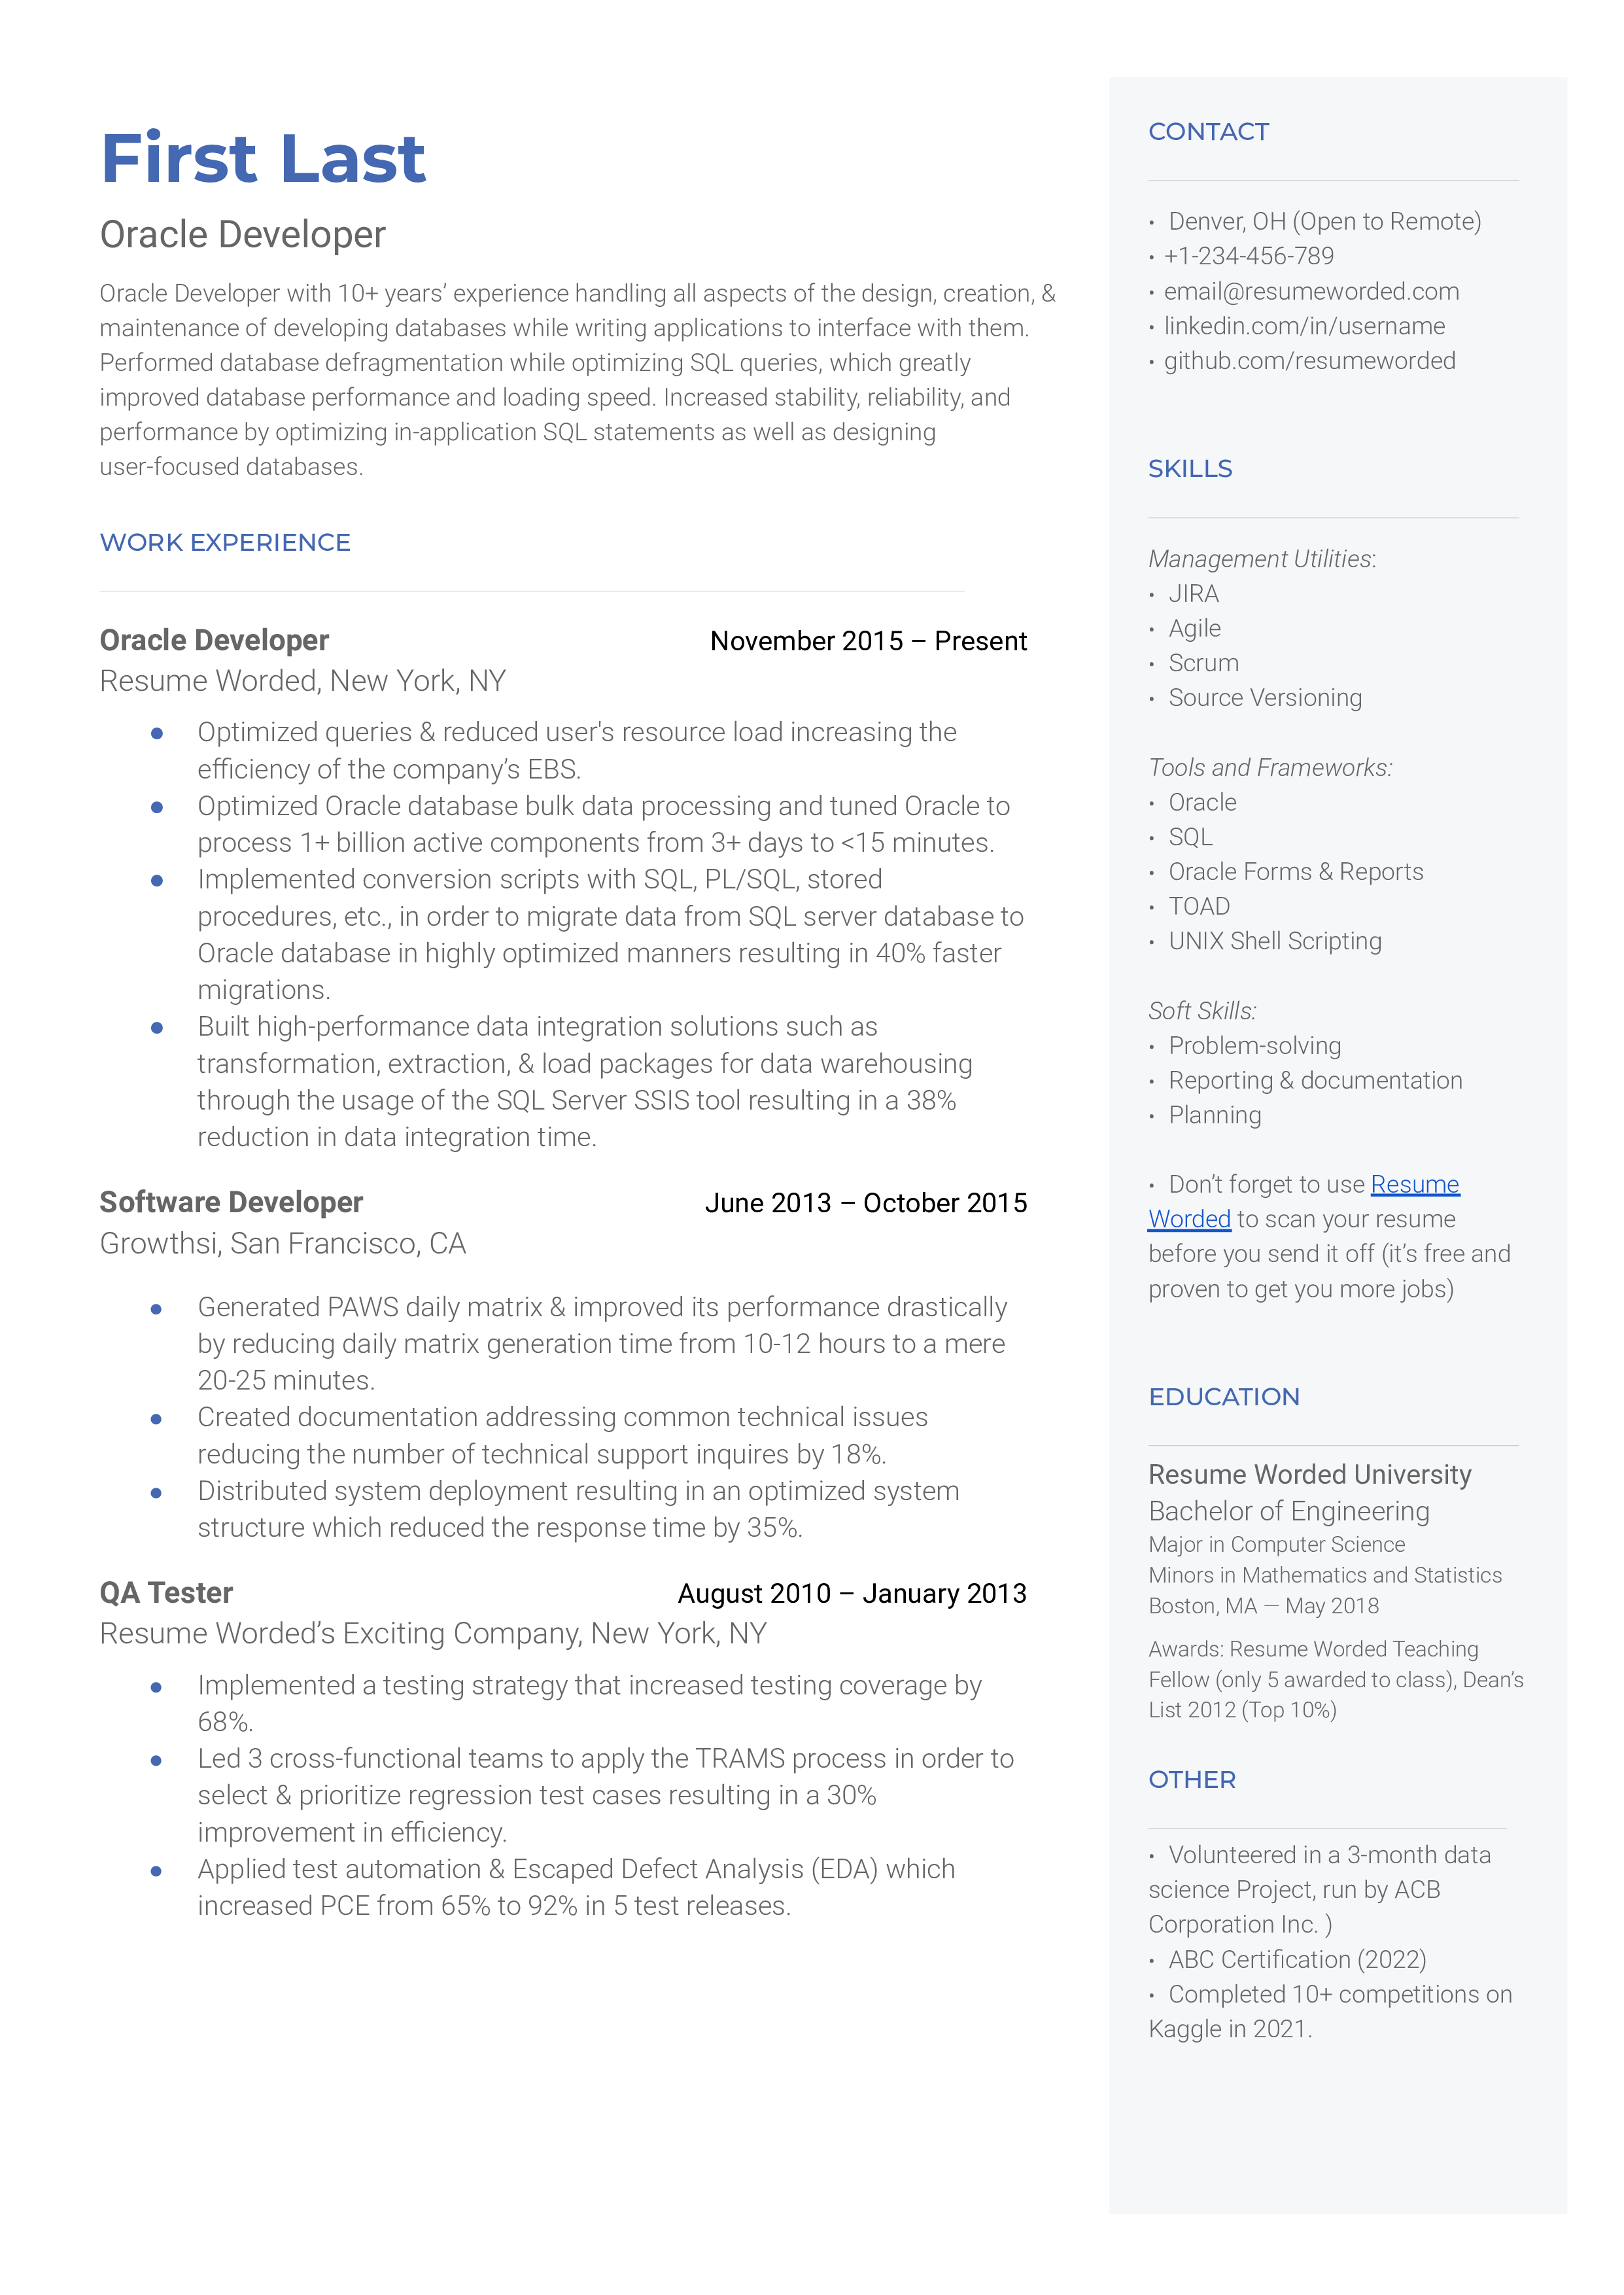 An Oracle developer resume template that includes a brief description, work history, and contact info